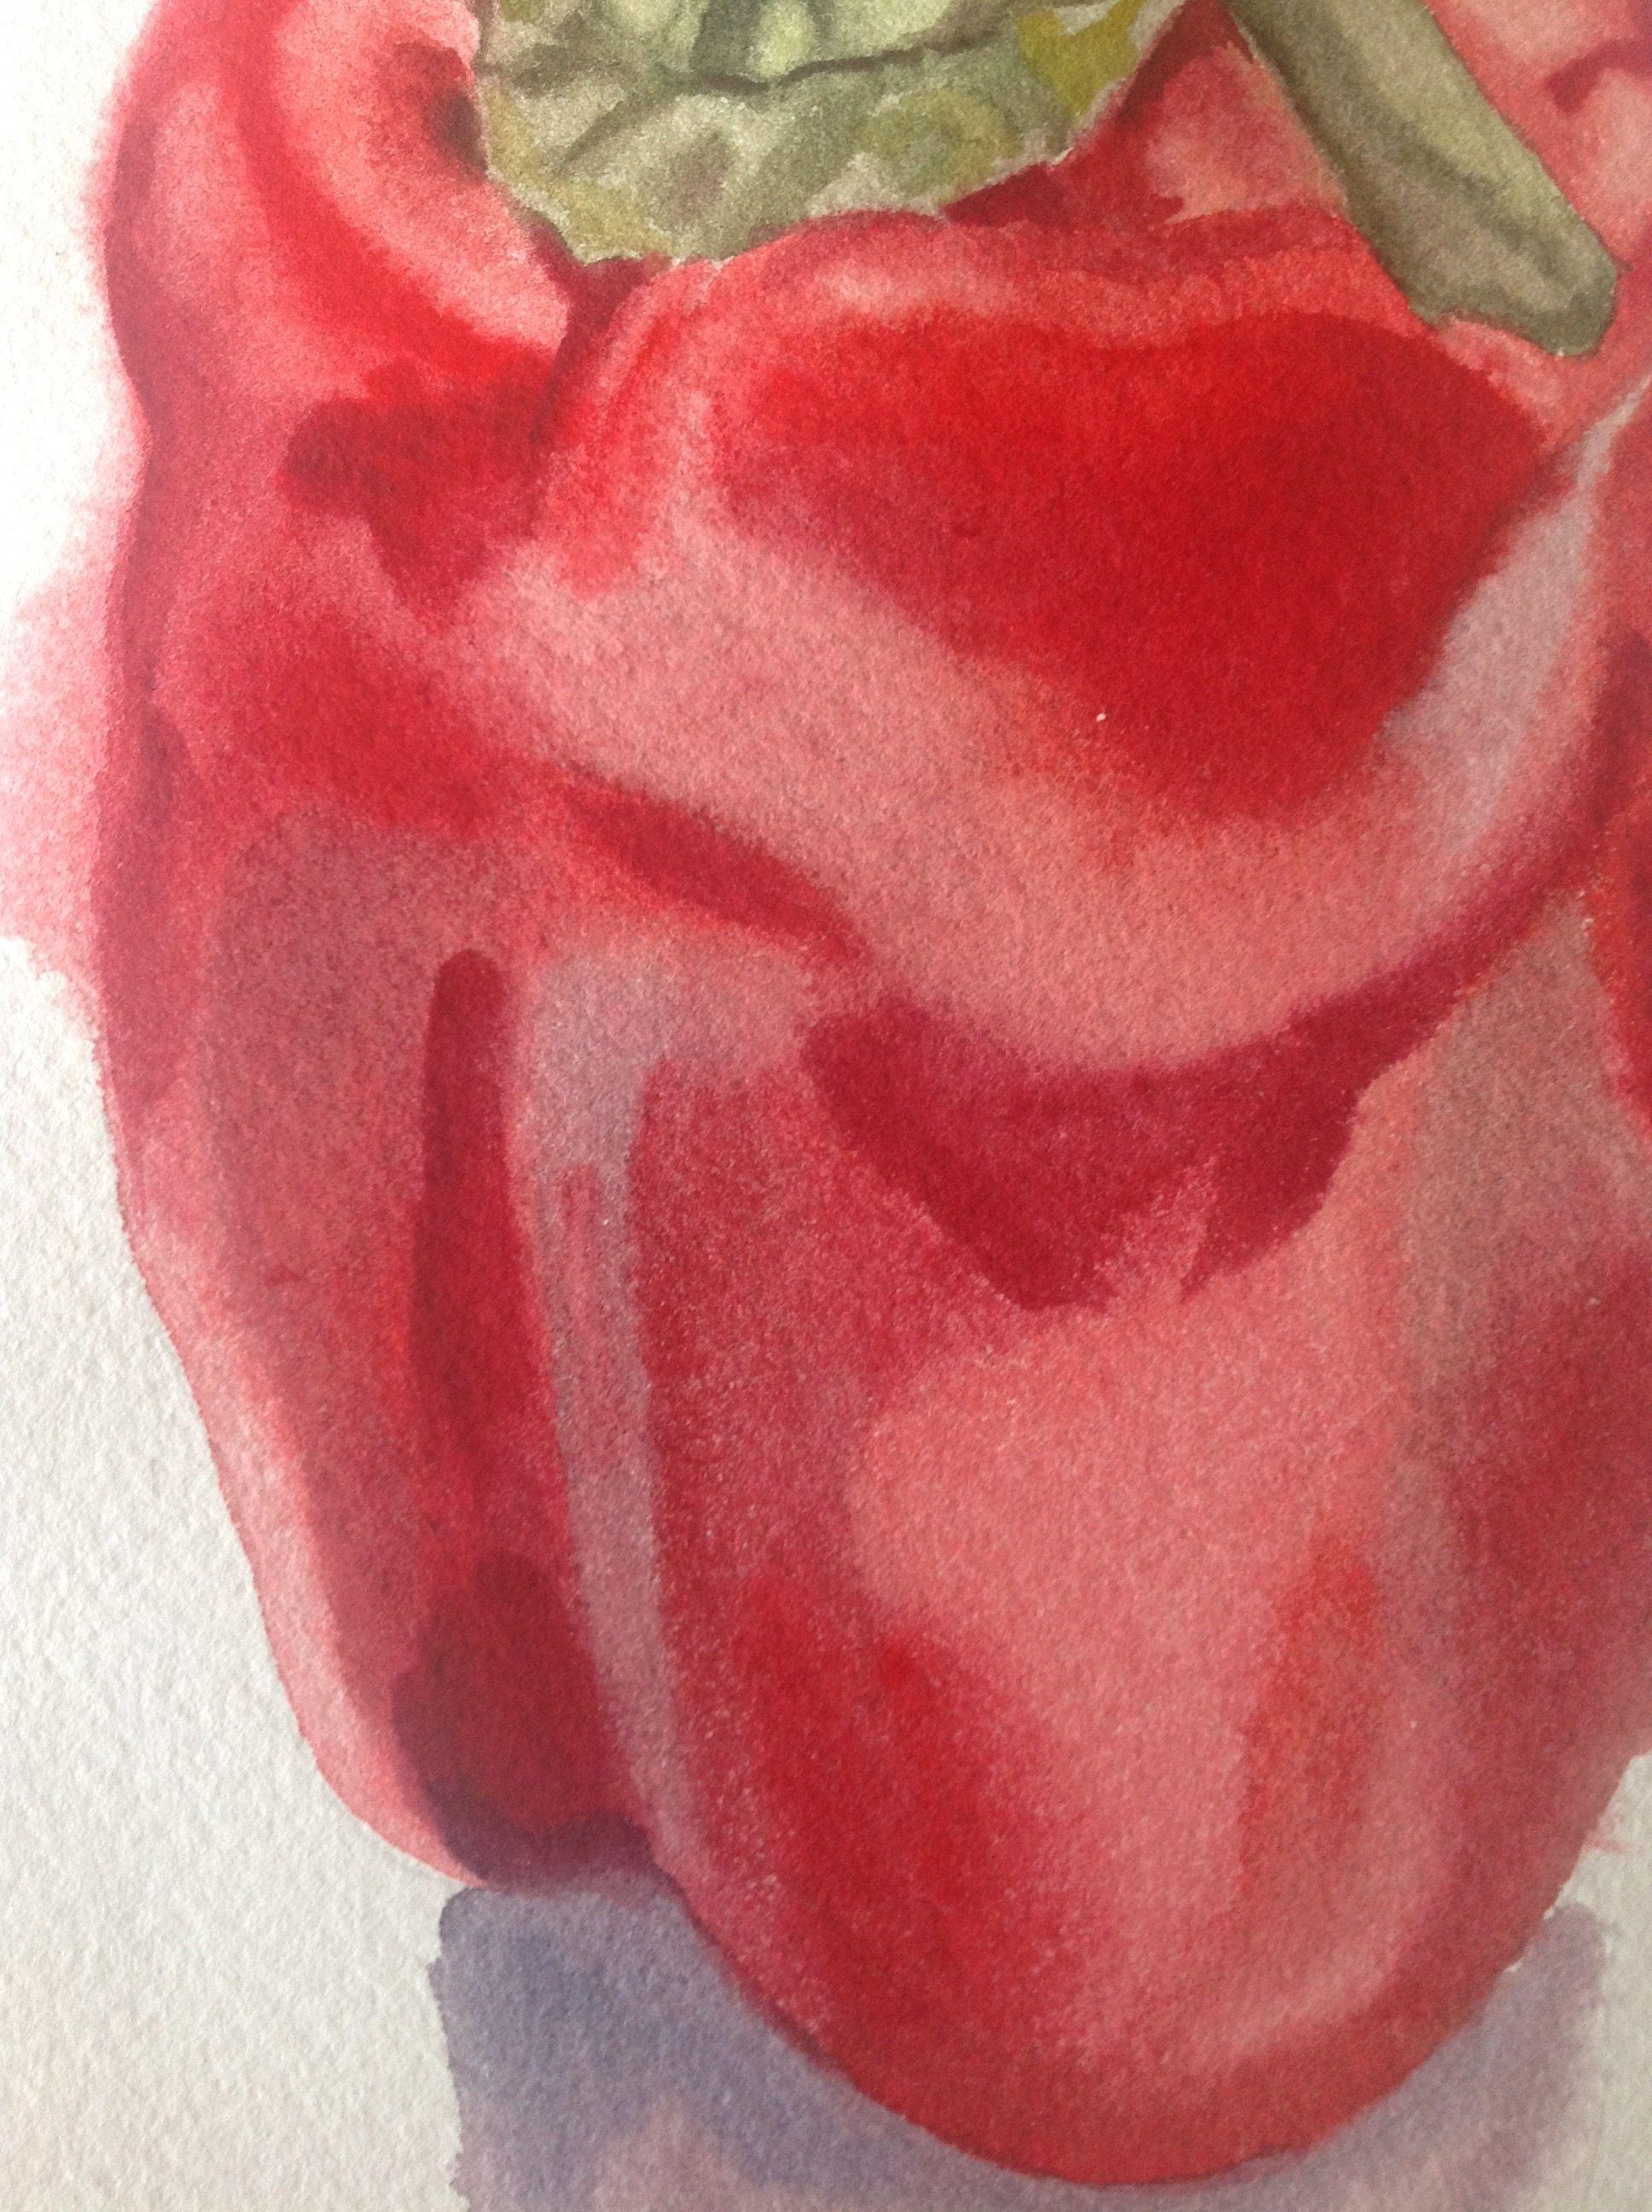 Red Pepper #1 2022, Painting, Watercolor on Watercolor Paper - Expressionist Art by Anyck Alvarez Kerloch